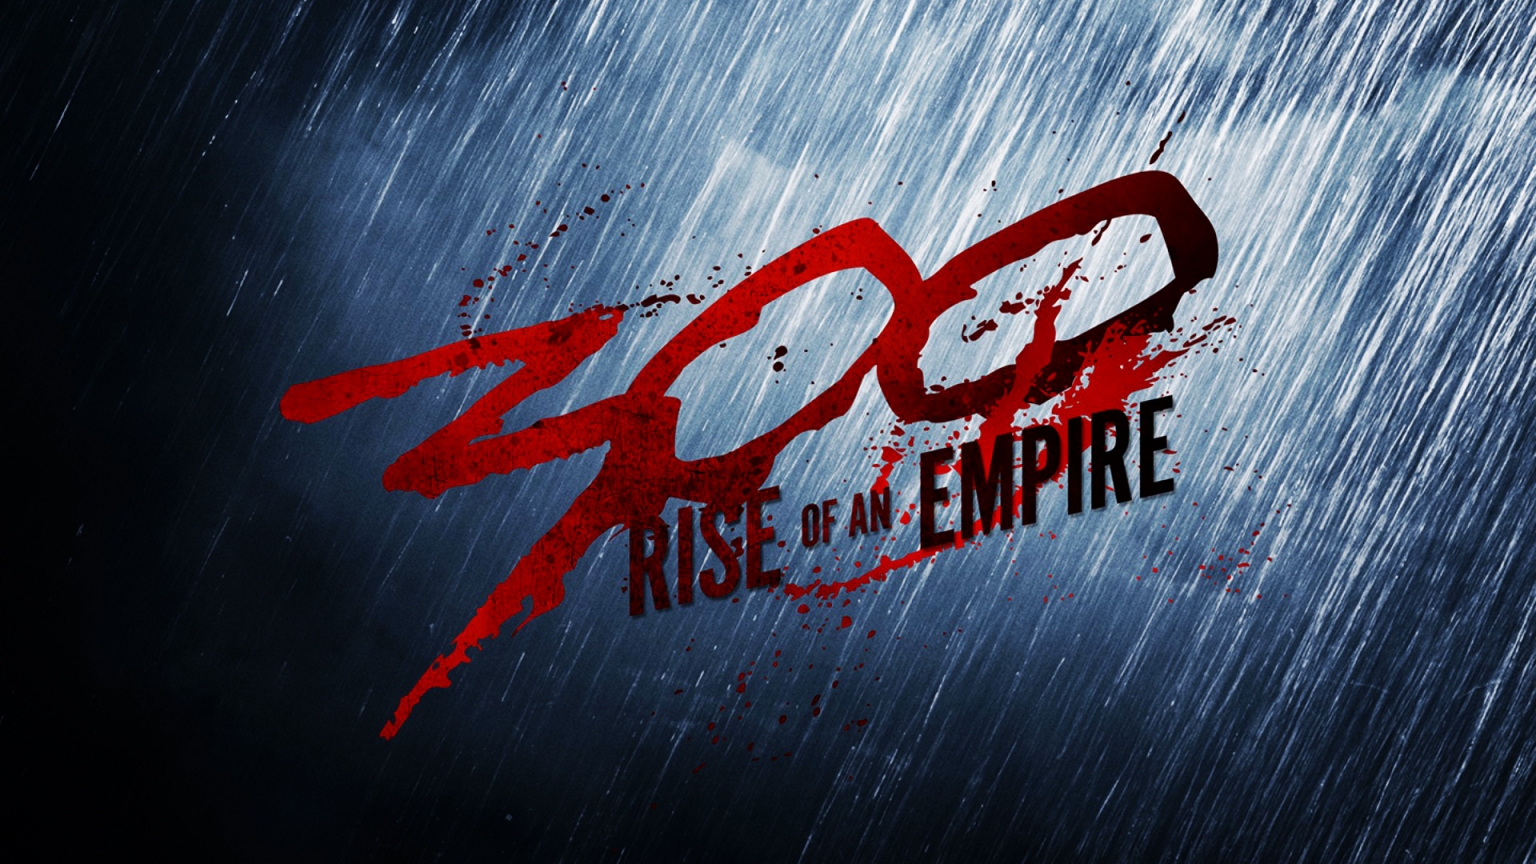 300 Rise of an Empire for 1536 x 864 HDTV resolution